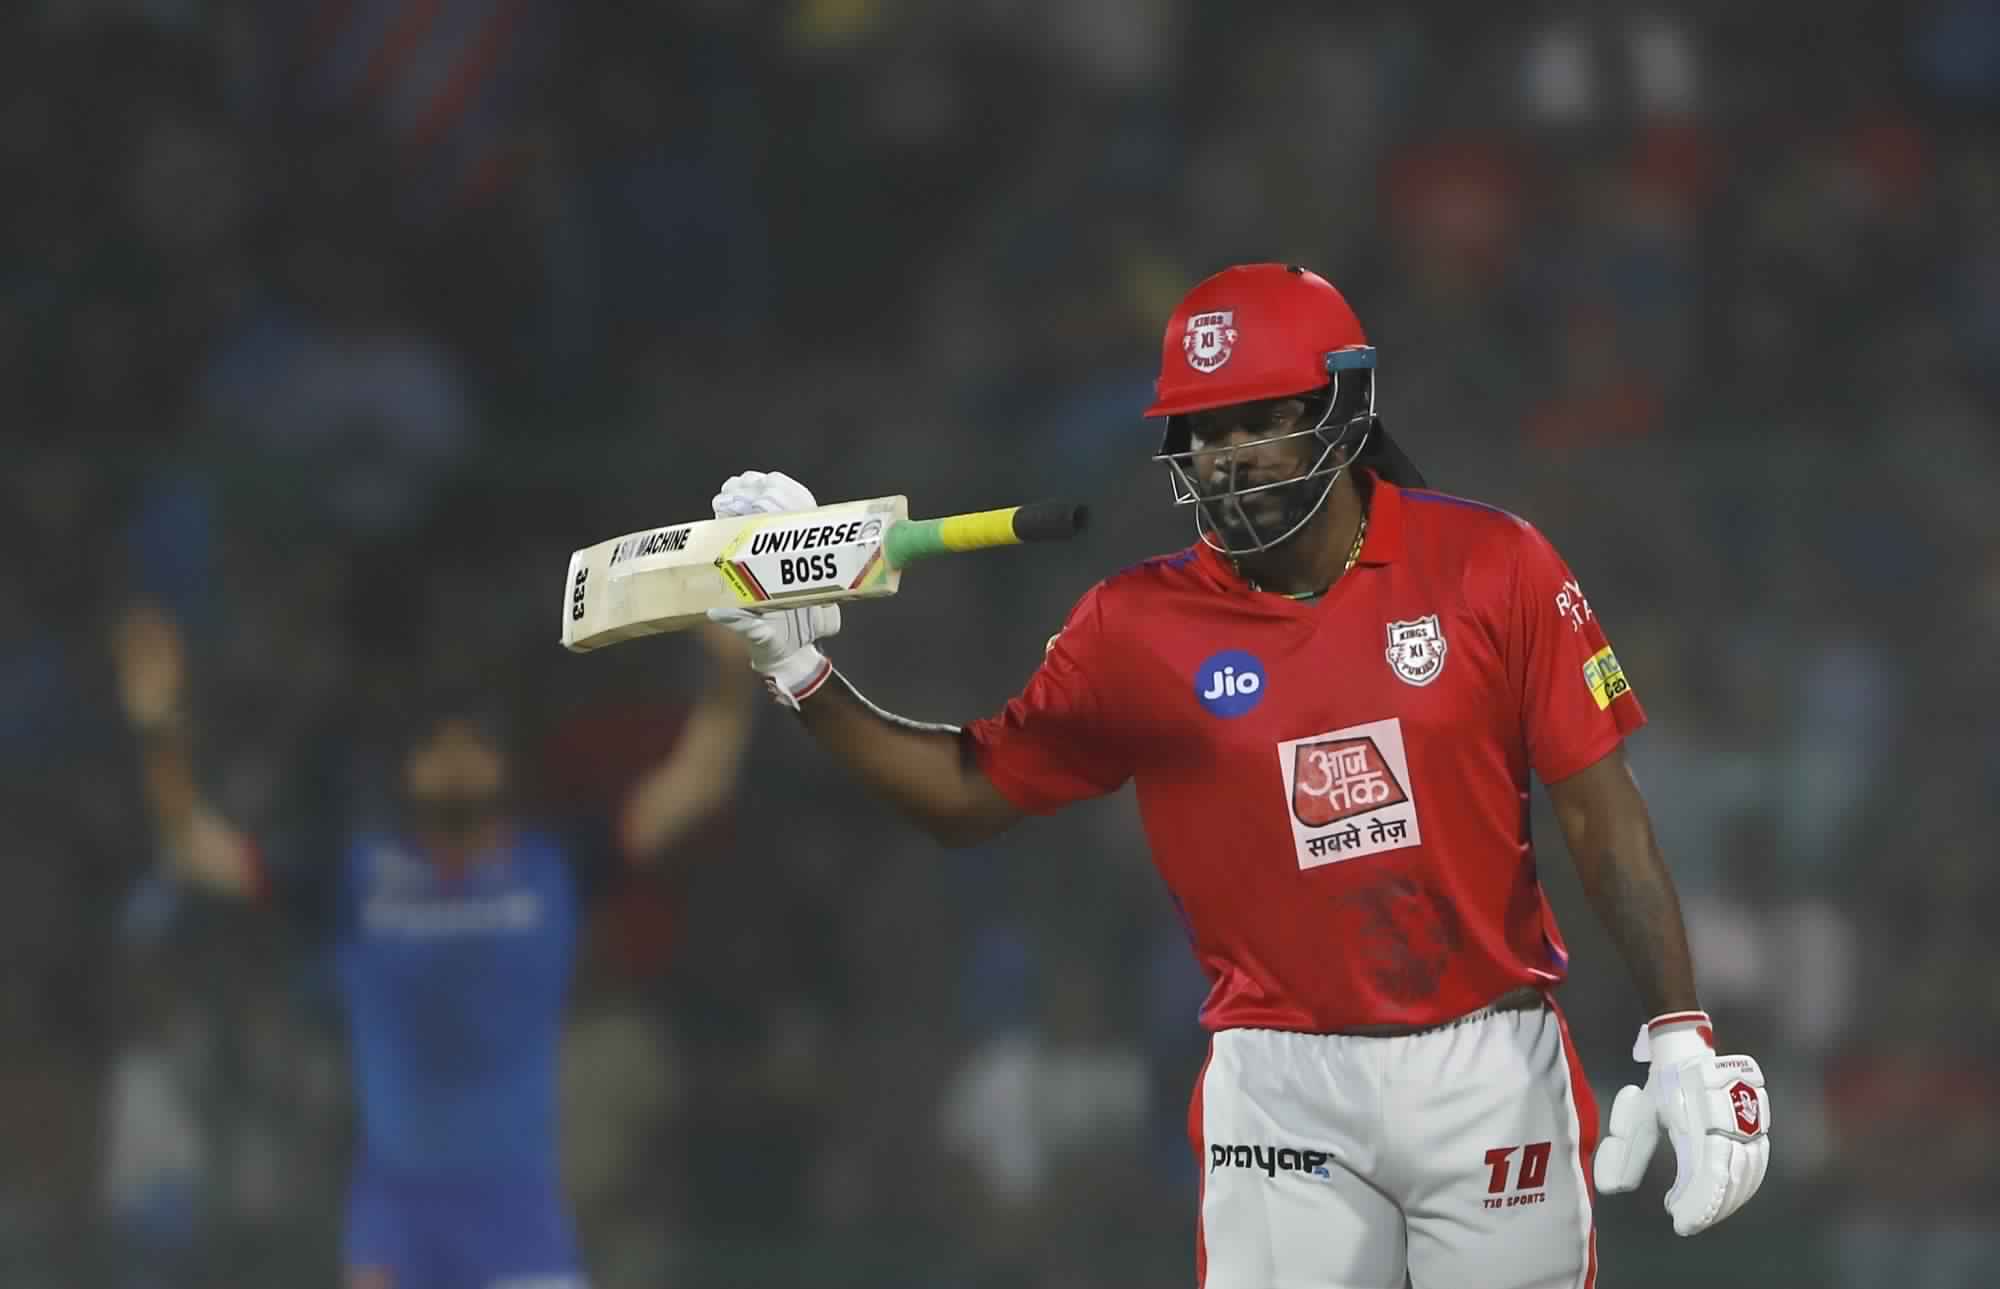 Chris Gayle for KXIP 